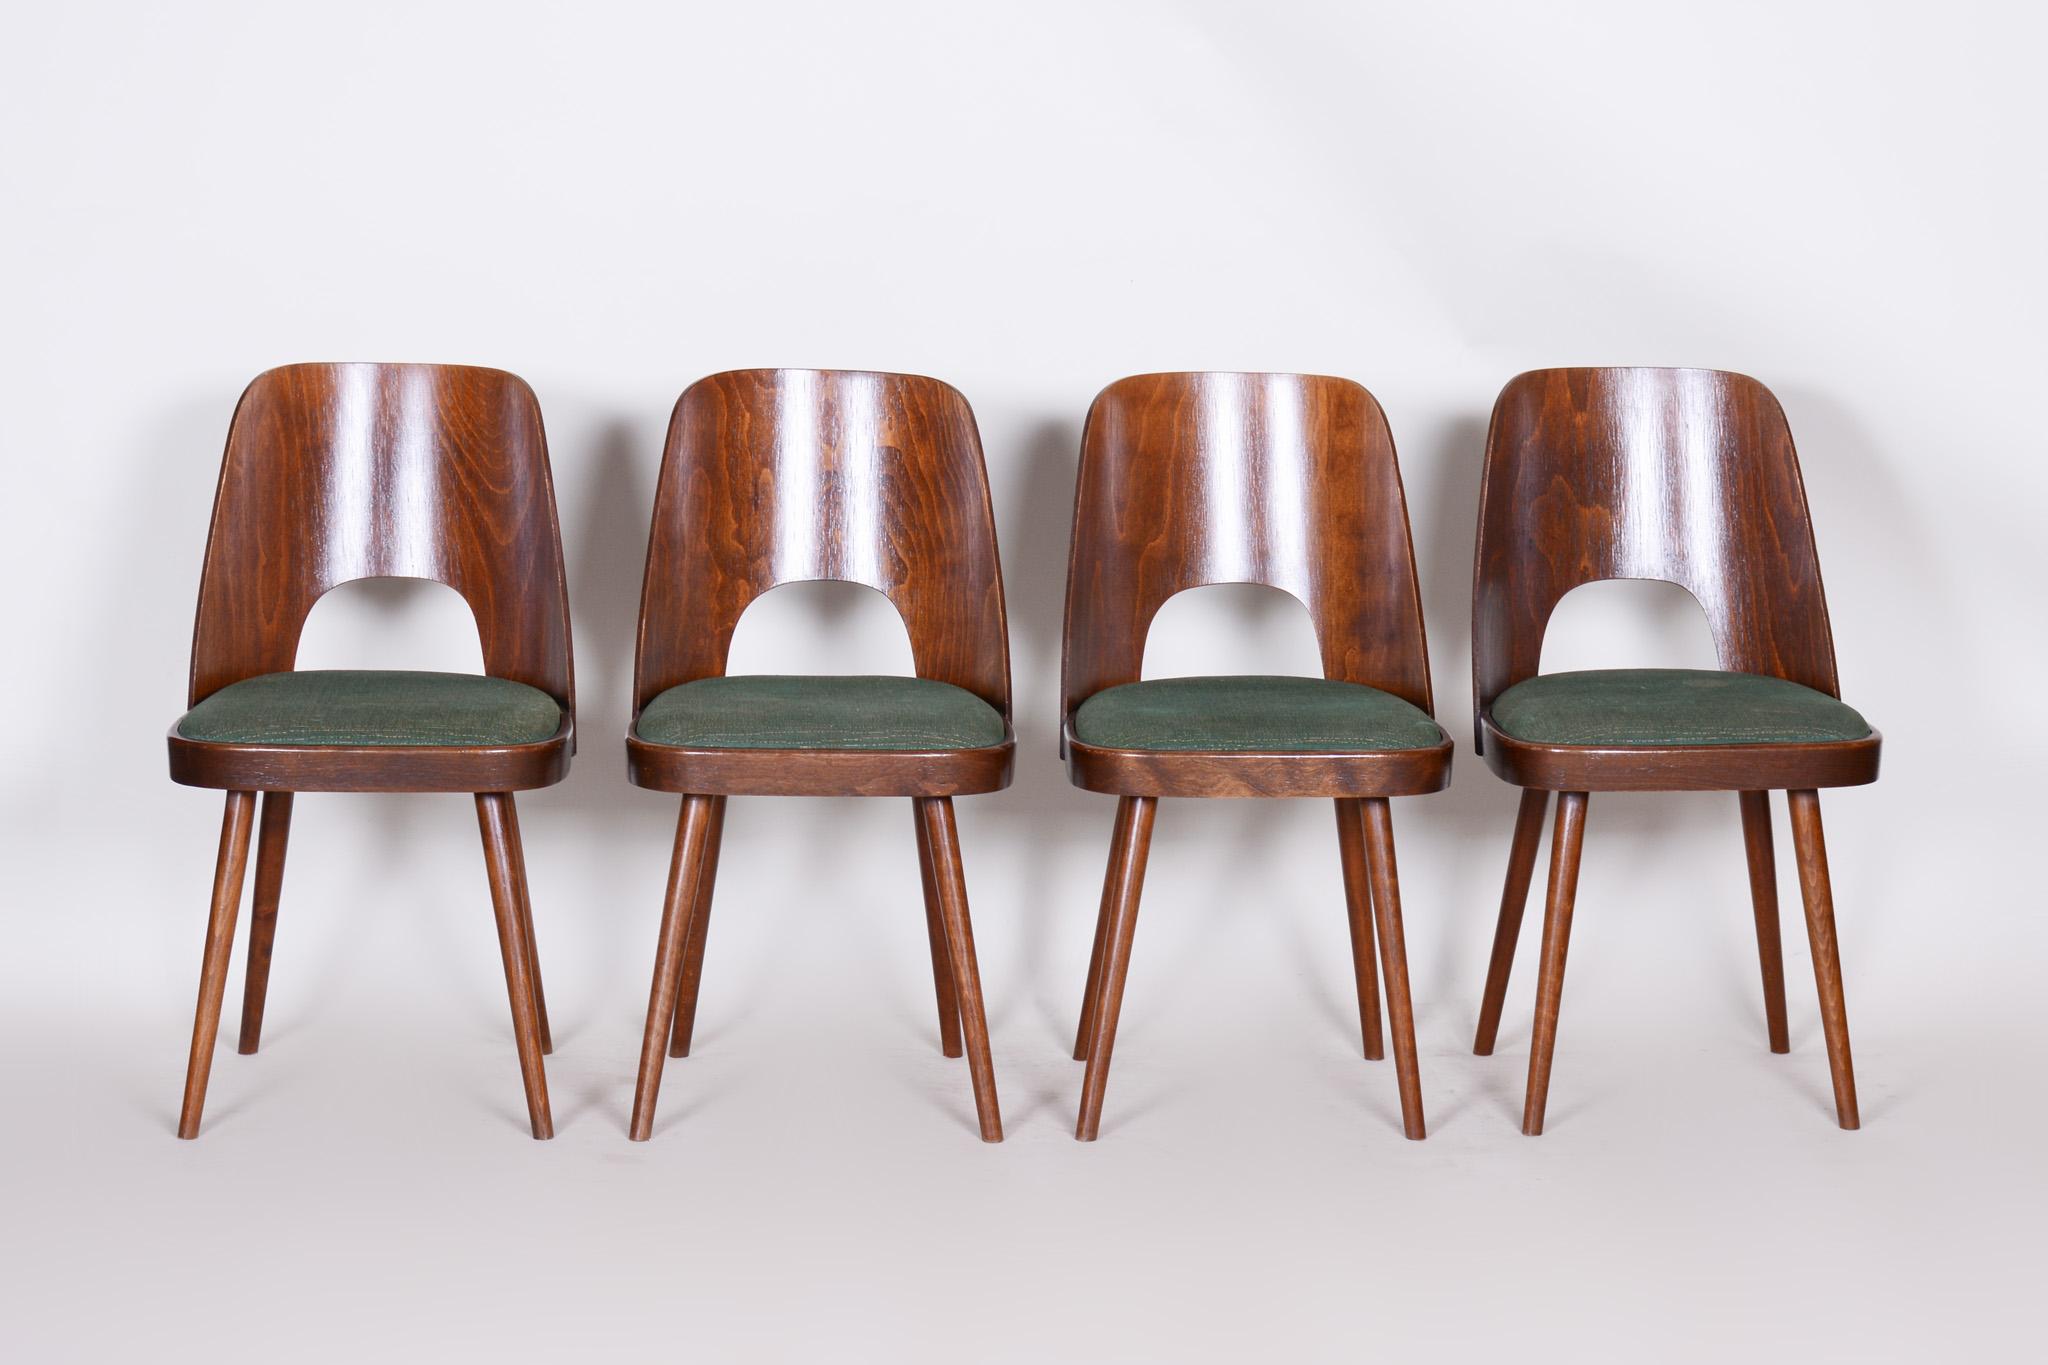 Czech midcentury chairs, 4 pieces.
Material: Walnut
Period: 1950-1959
Original preserved condition
Made by architect Oswald Haerdtl.